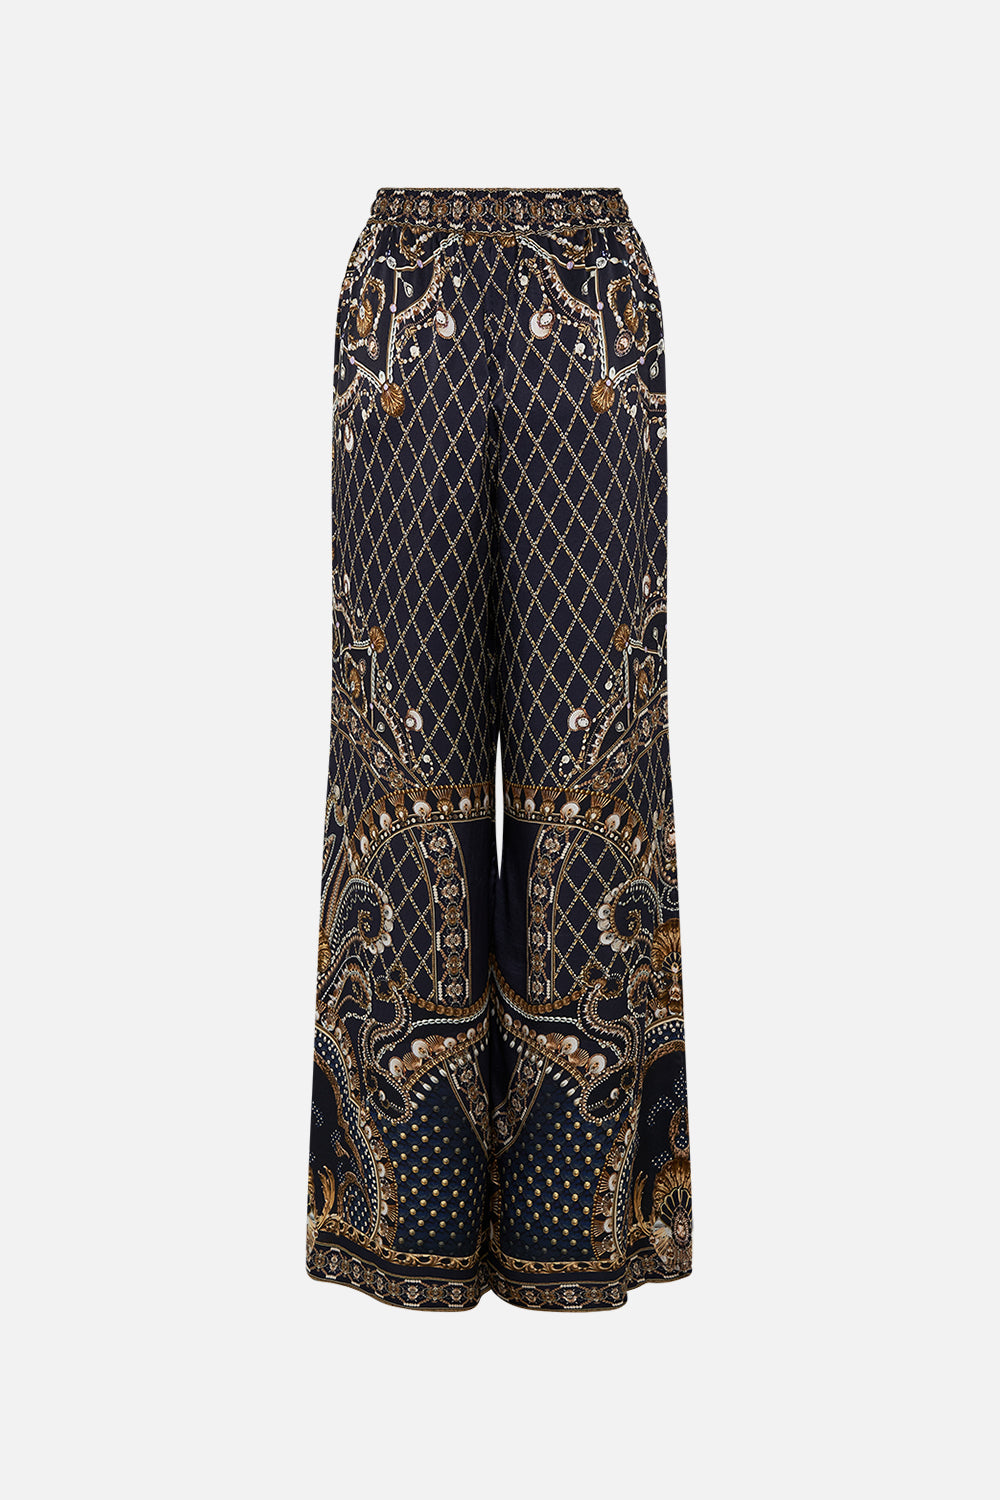 CAMILLA Gold Lounge Pant in Dance with the Duke print